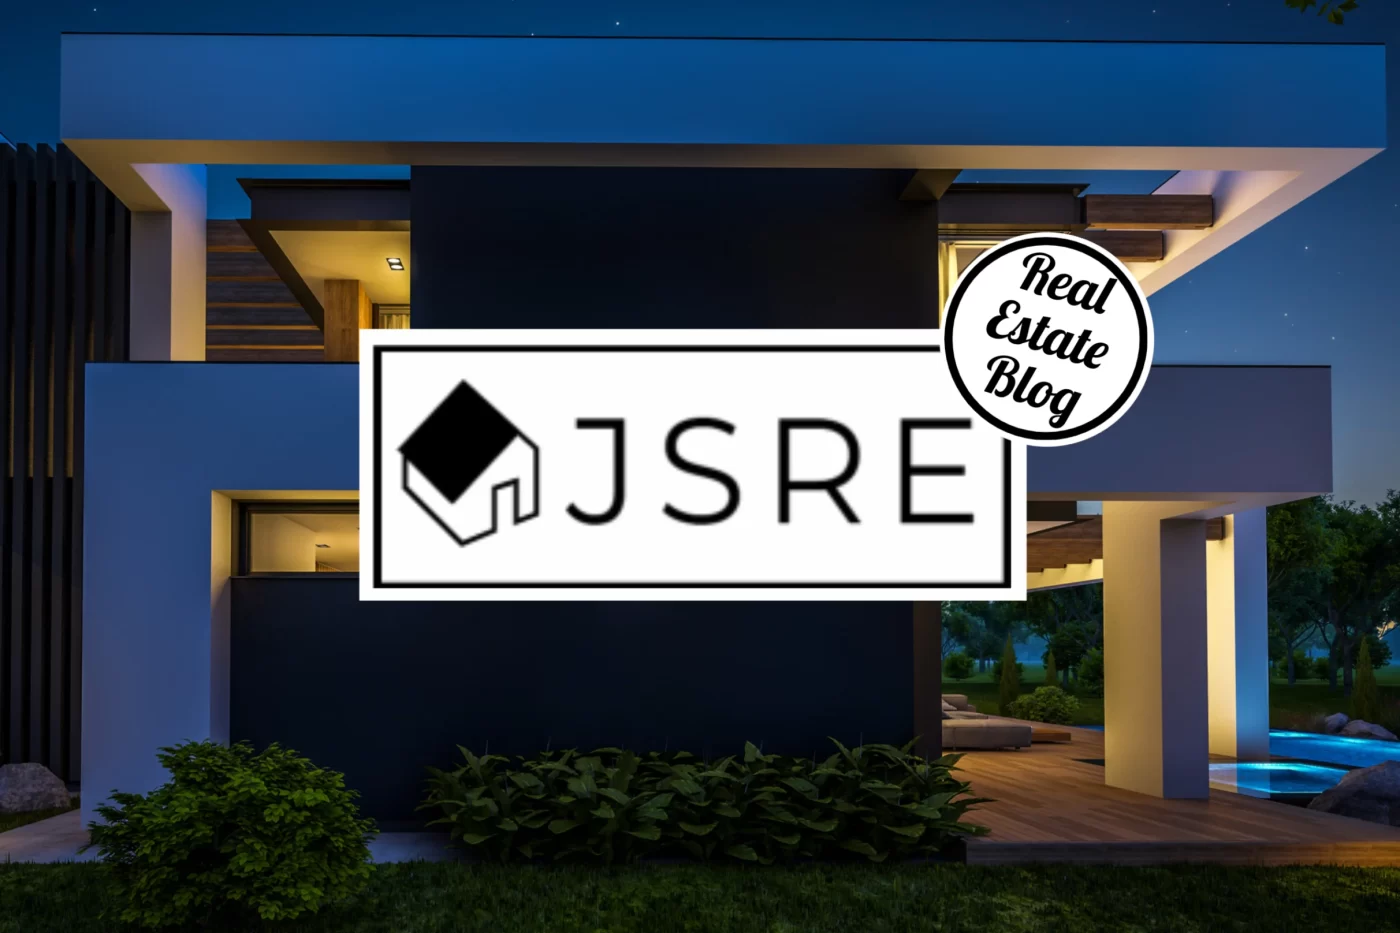 Real Estate Blog.Visit the JSRE Blog for up-to-date info on, market trends/data/statistics, industry news articles, topics of interest for buyers & sellers, and more!  